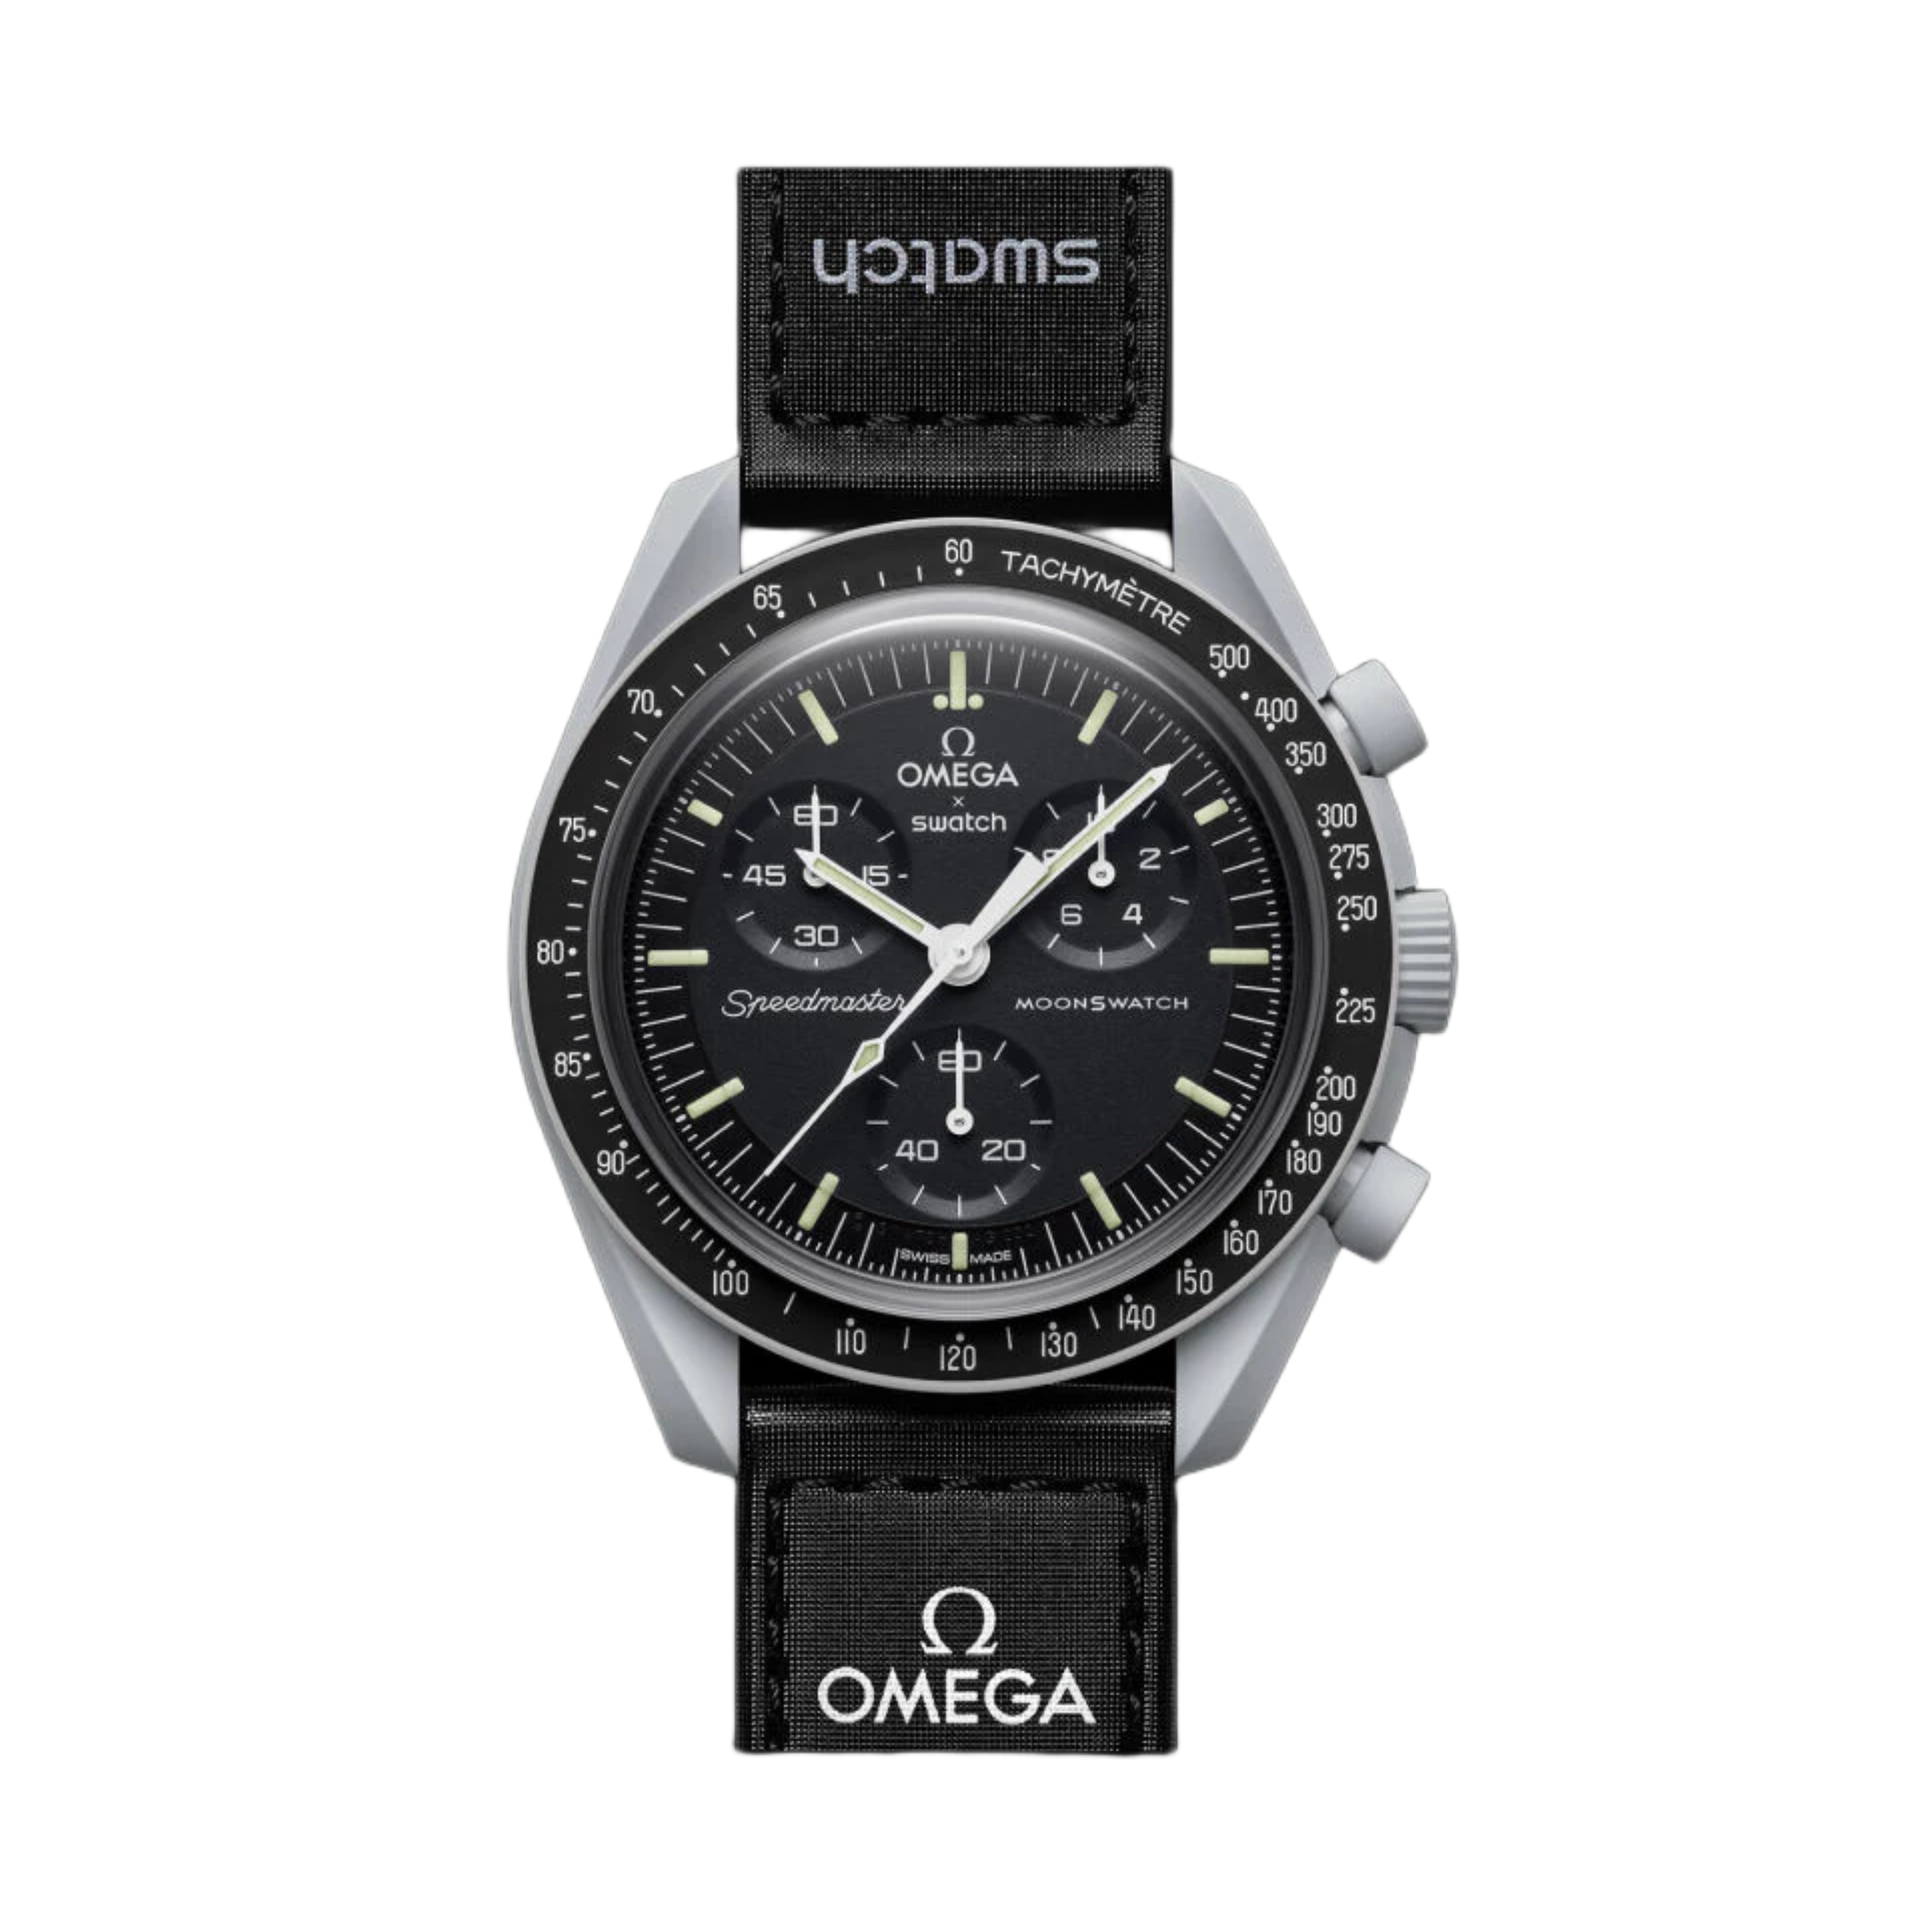 Omega x Swatch Speedmaster Mission to the Moon Chronograph 